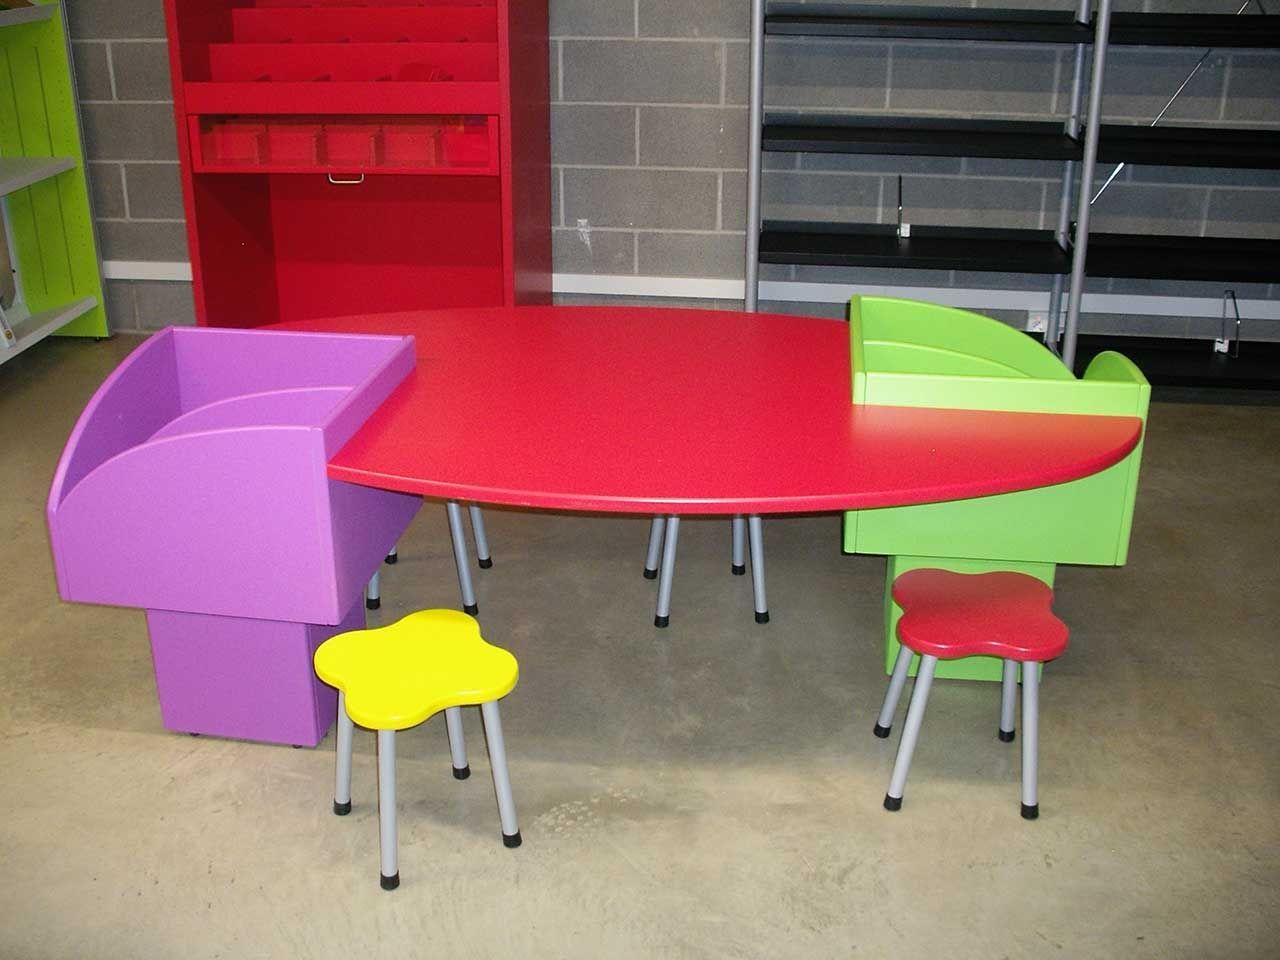 Oval table with storage container for tales